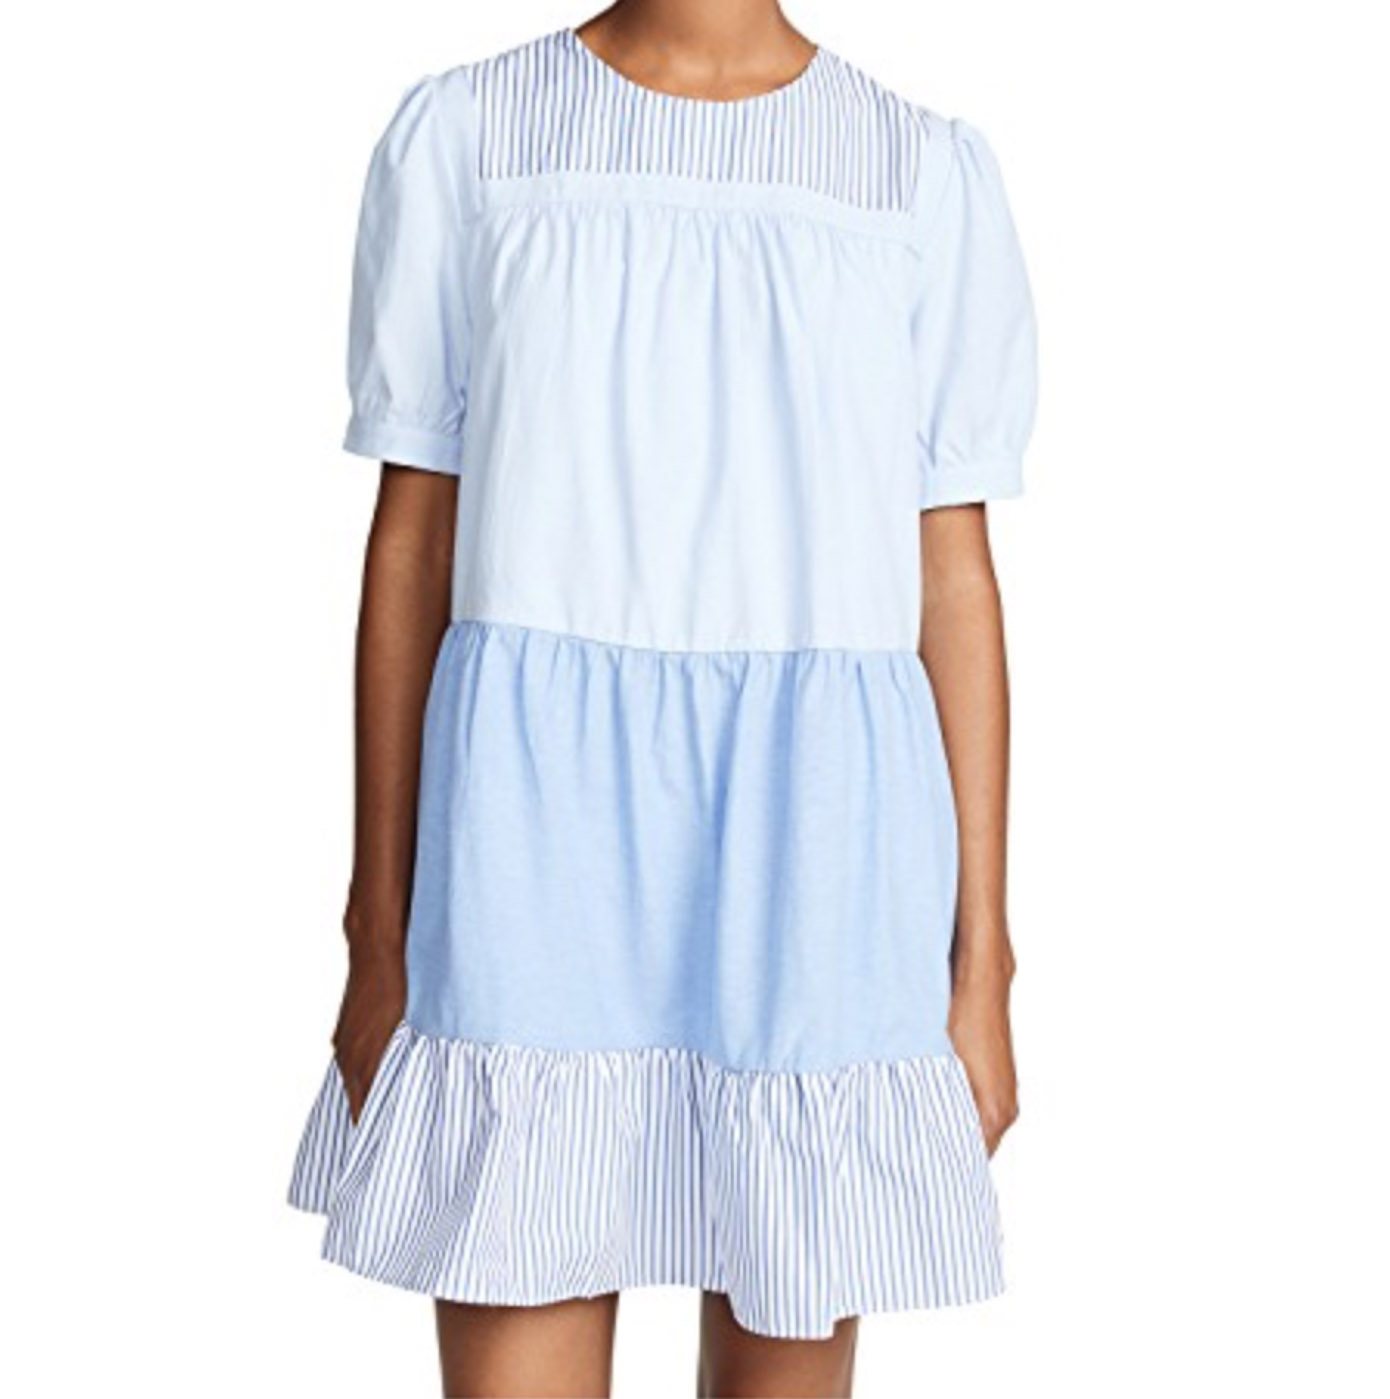 Laura Leigh of Louella Reese shares her favorite summer purchases of summer 2018 including this adorable English Factory Blue & White Dress